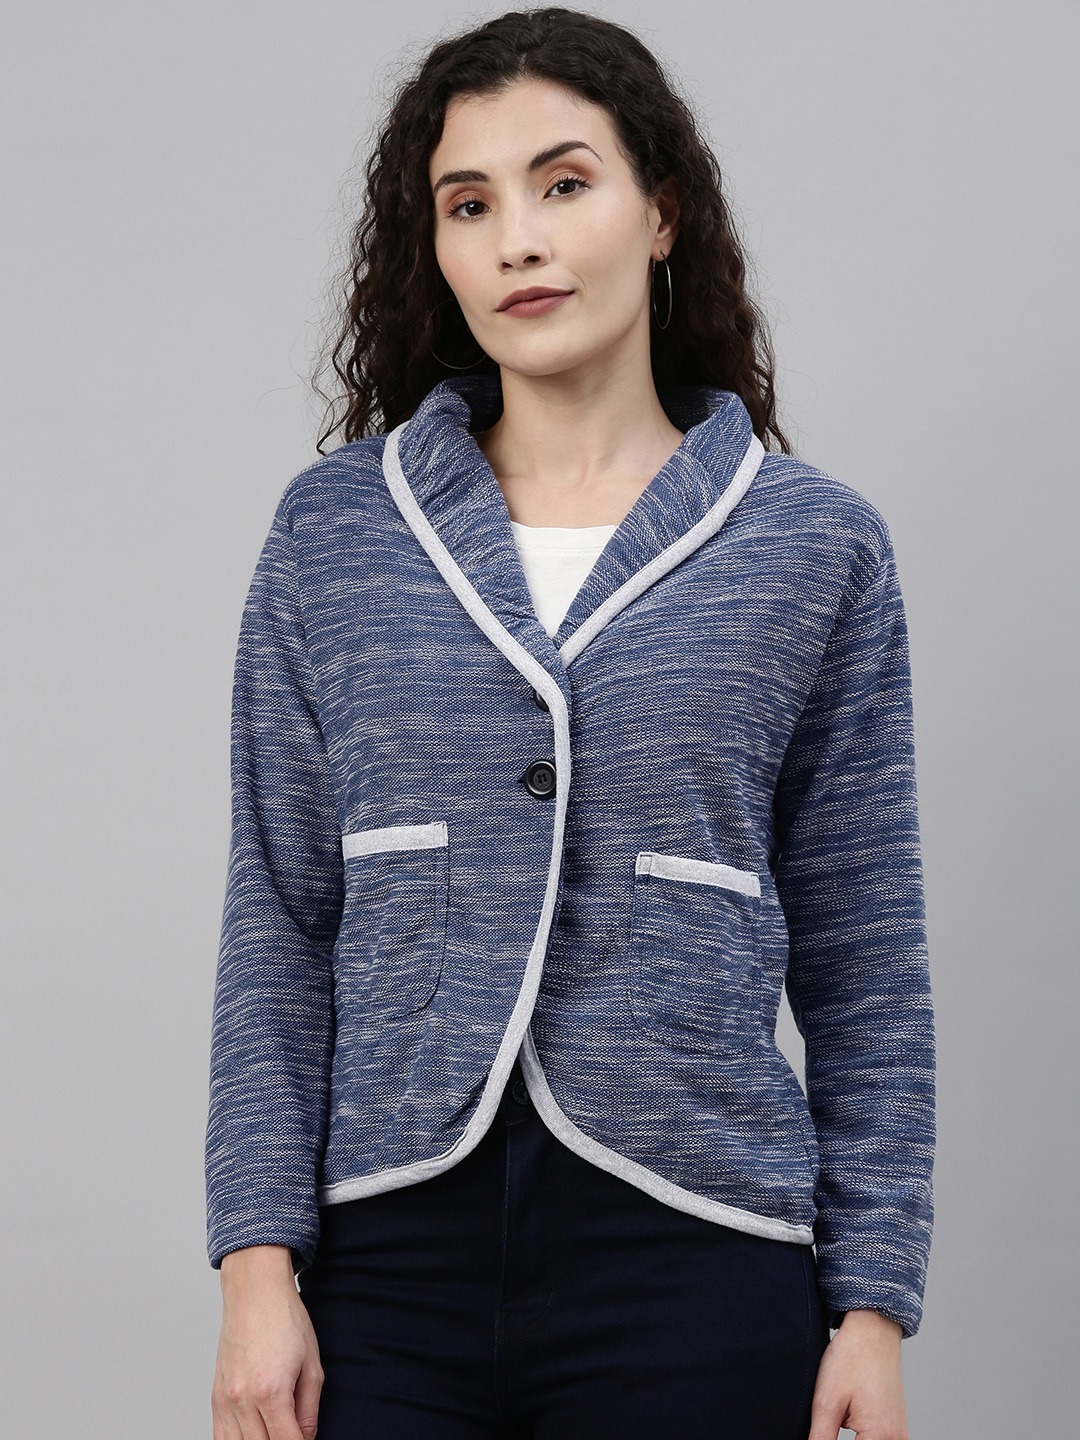 Clothing Blazers | Campus Sutra Women Blue Melange Comfort Fit Single-Breasted Casual Blazer - RV88973